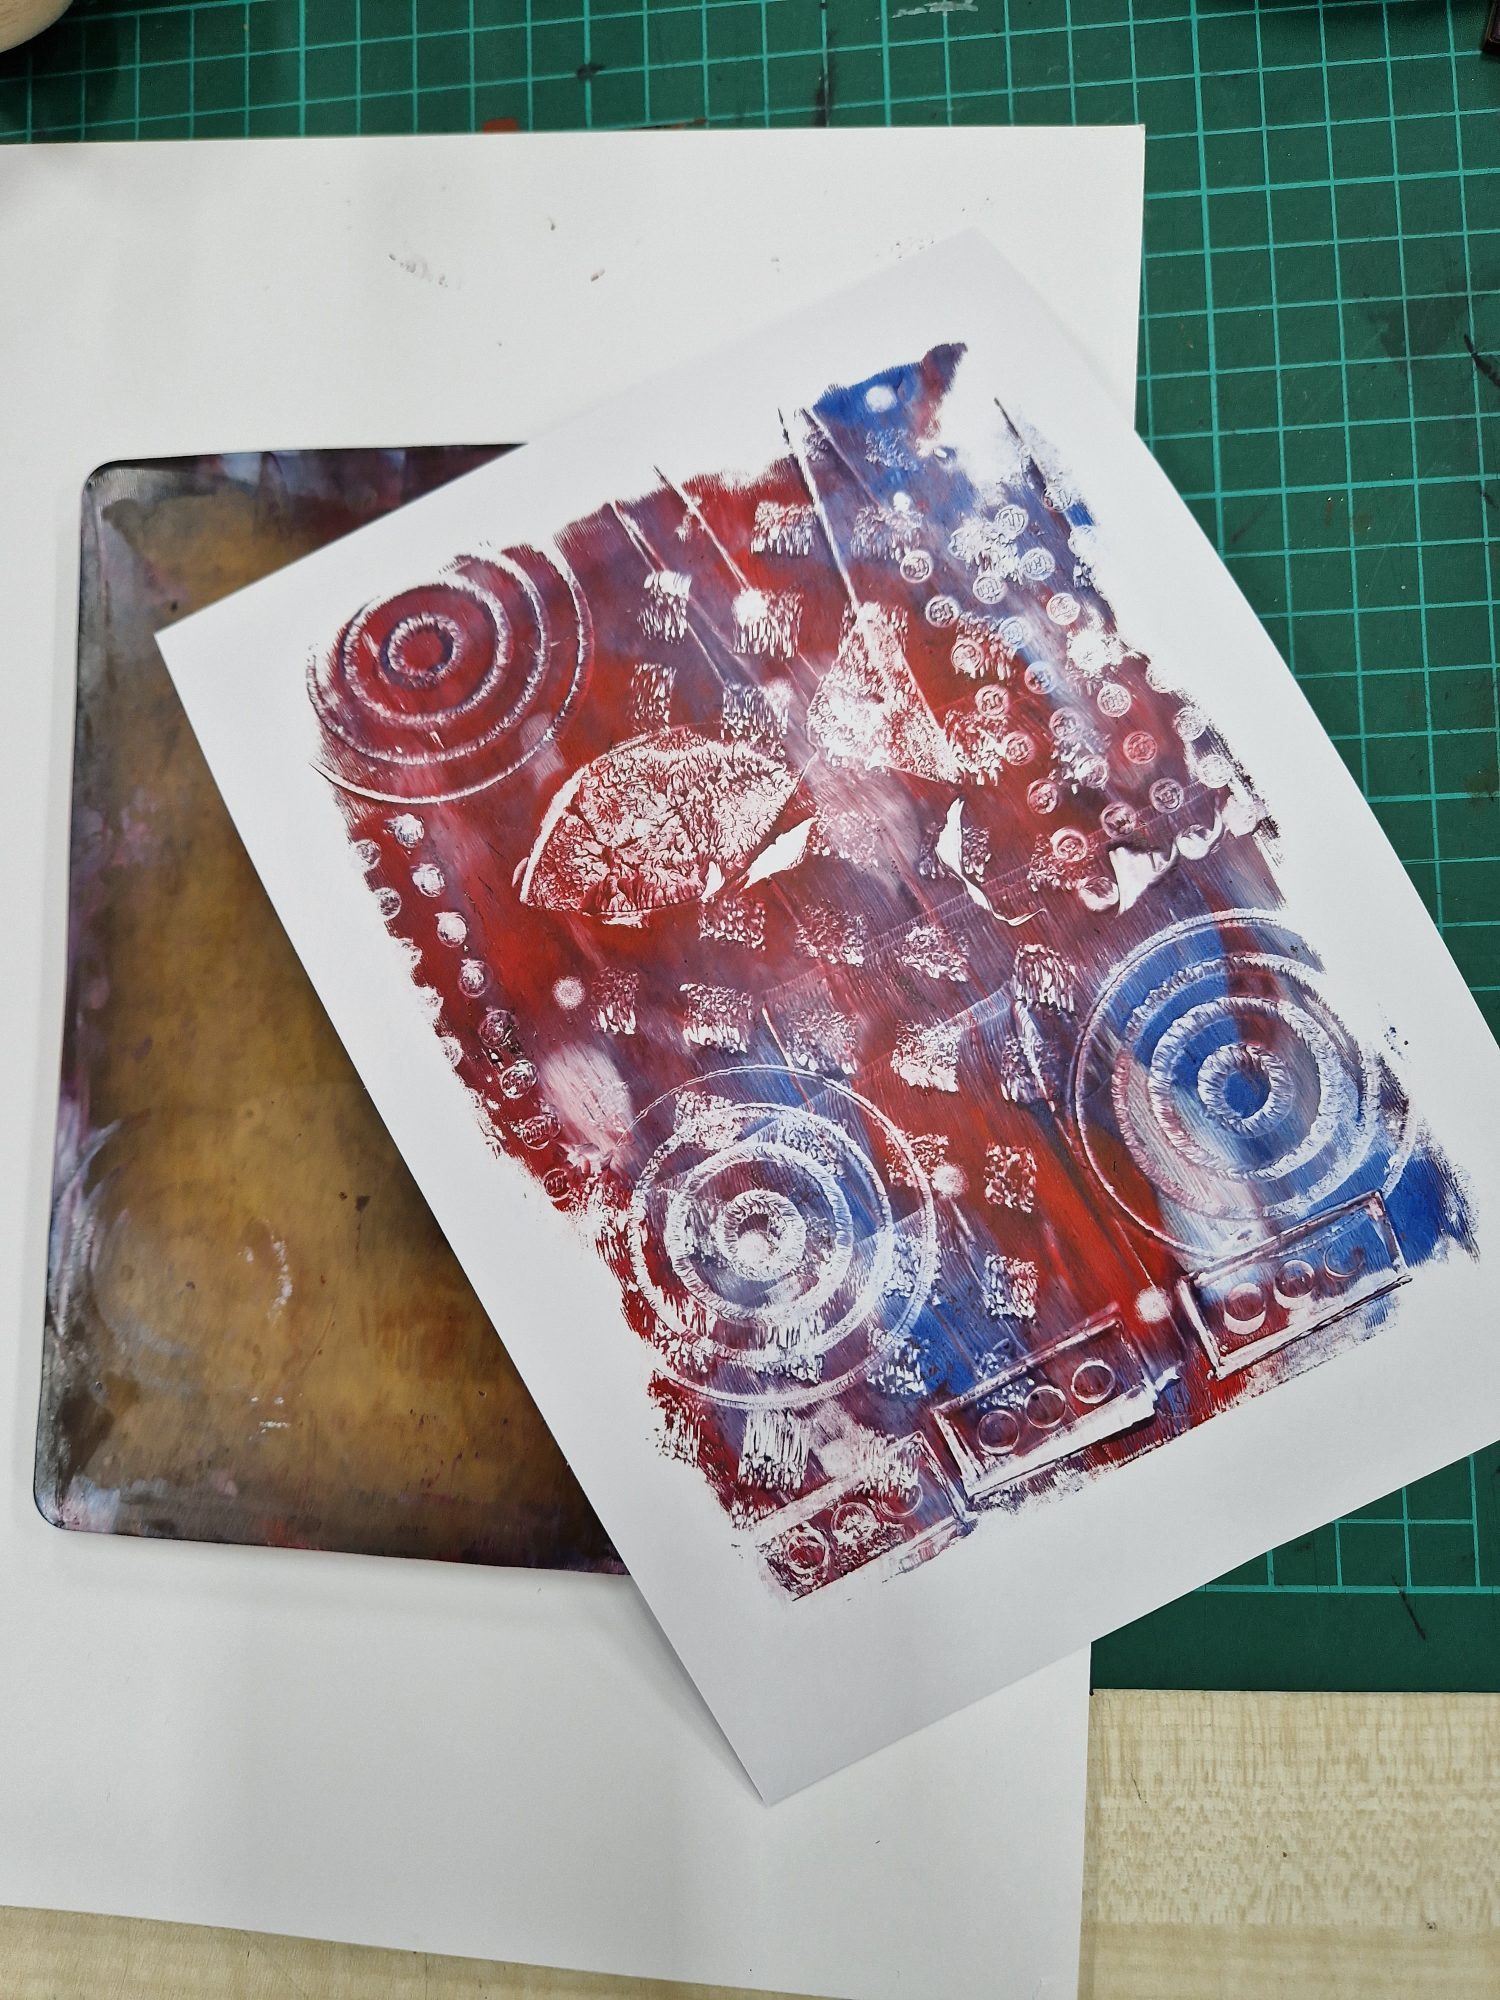 Gelli plate print of blue and red swirls with plate in background